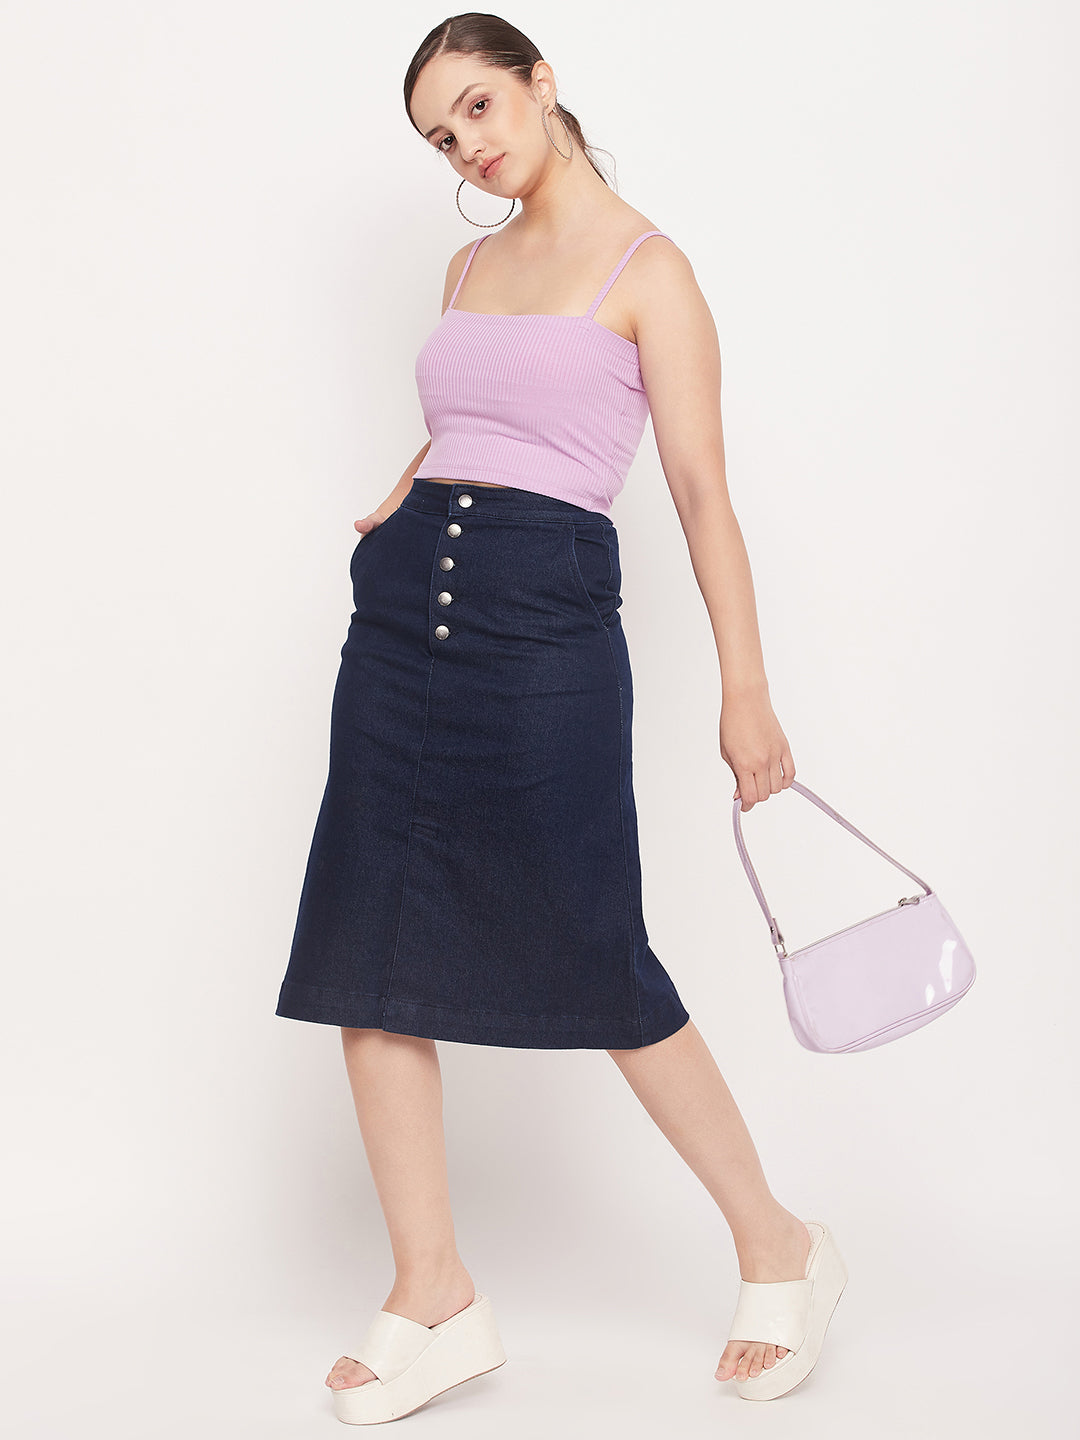 Is The Maxi Denim Skirt In Style For Summer 2021? - Special Madame Figaro  Arabia